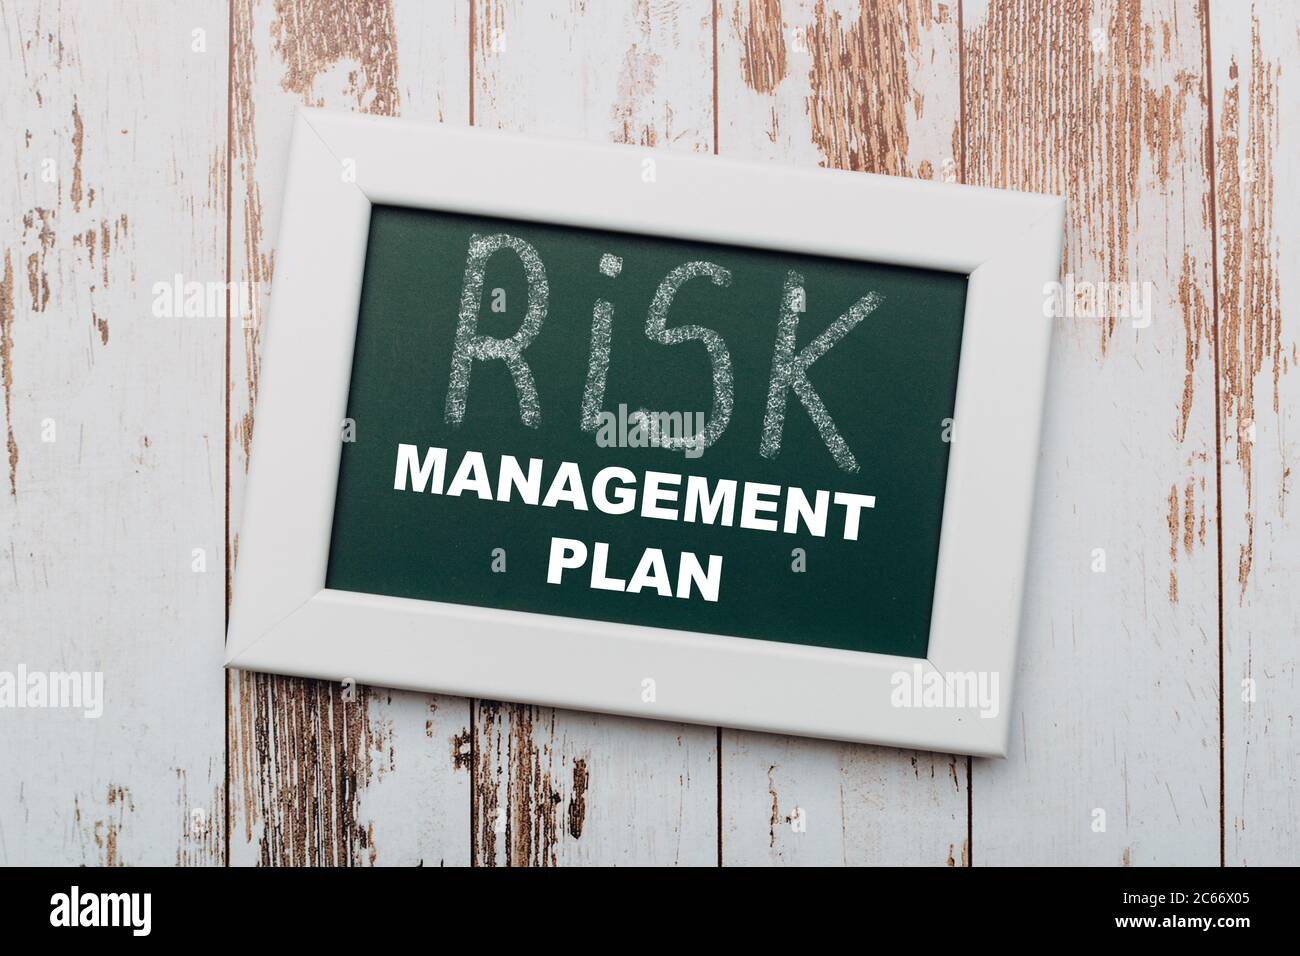 problems the global economy and stock markets, the concept of the financial crisis. CRISIS MANAGEMENT PLAN Stock Photo